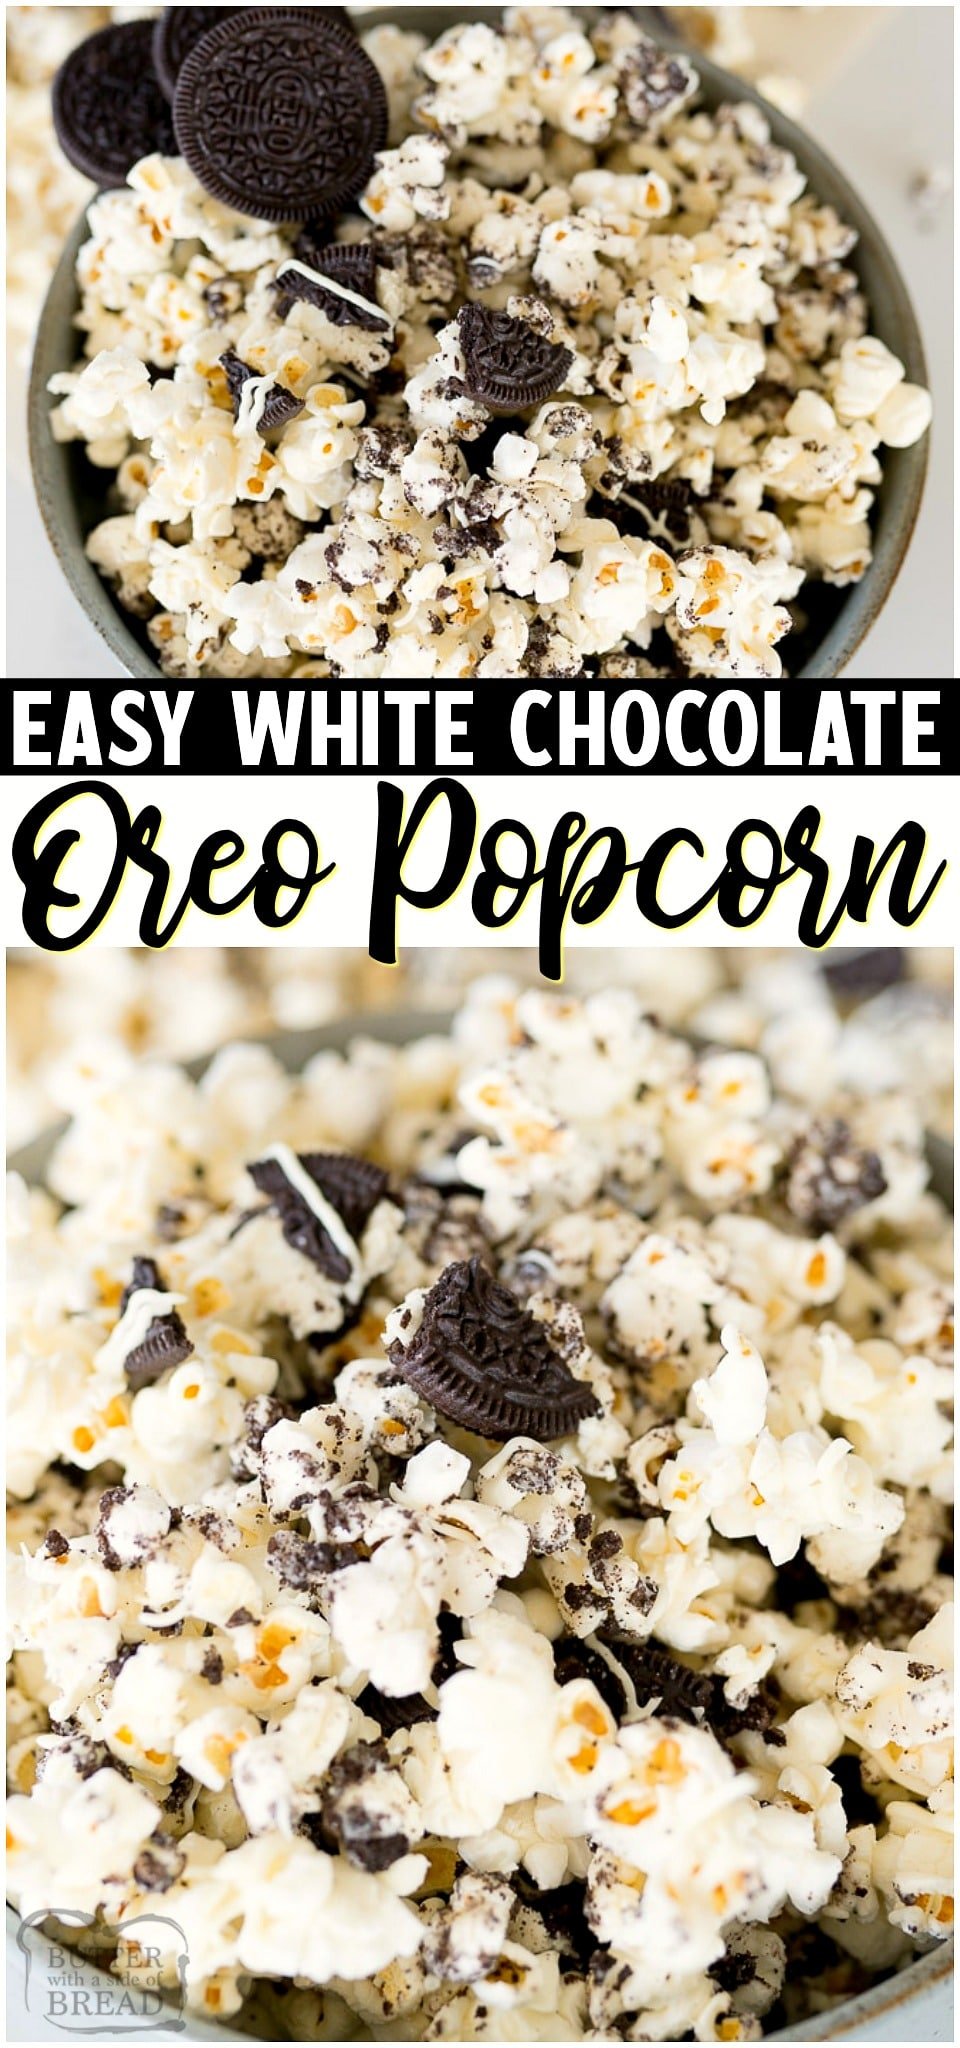 Easy OREO Popcorn is a dessert popcorn made in minutes with just 3 ingredients! Popcorn, white chocolate & Oreos combine for an amazing cookies & cream treat! It's a must-have dessert for Oreo lovers!